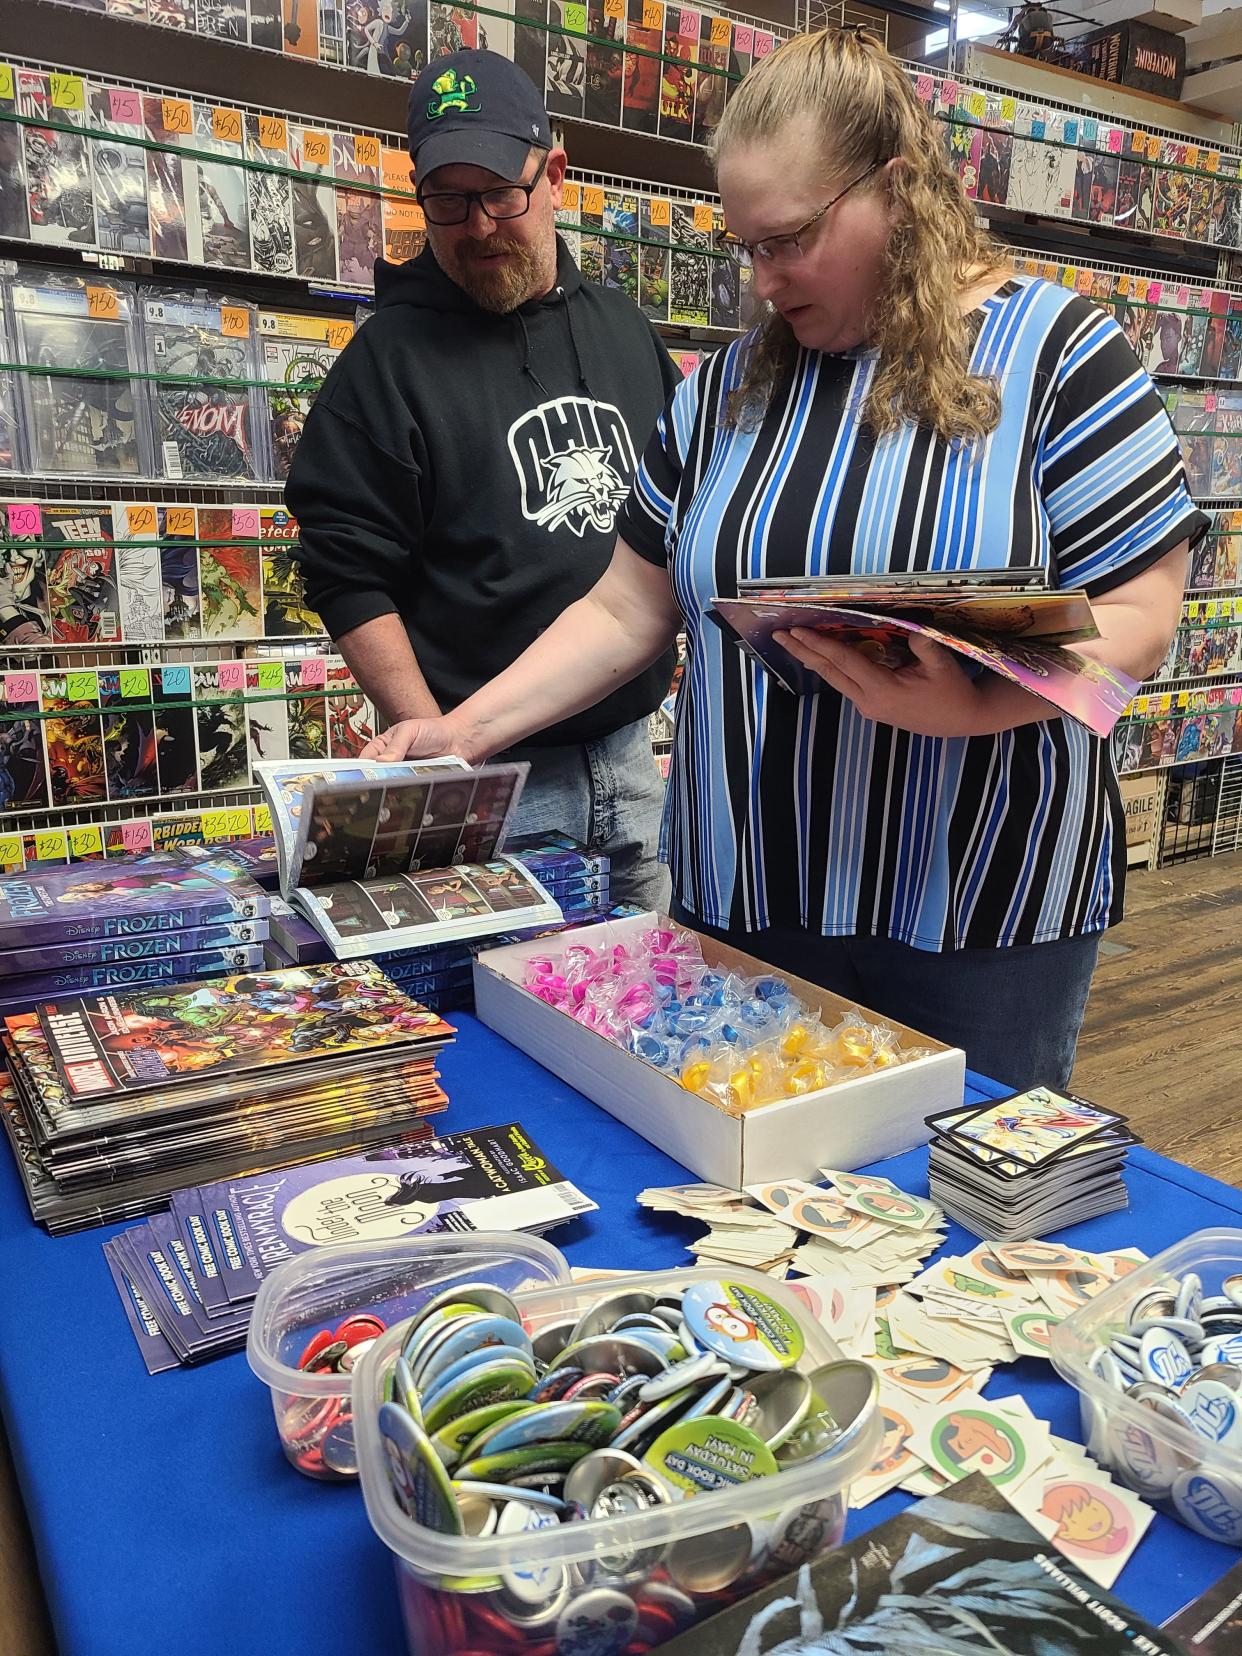 Cyndy and Don Britenburg look over books and buttons at Rupp's Comics.